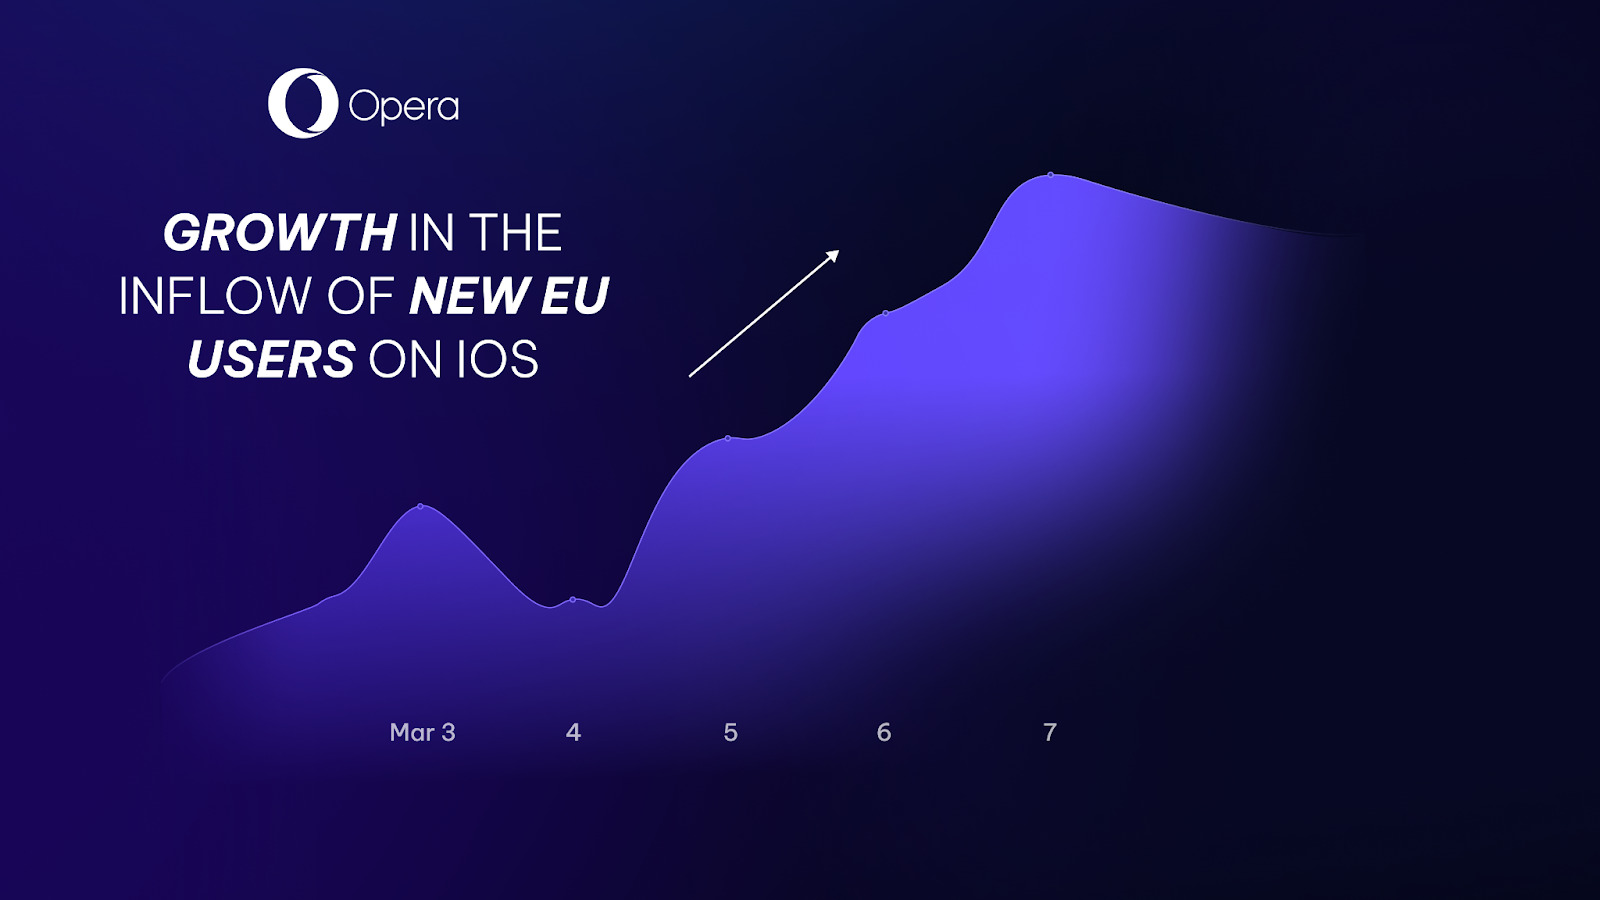 Graph with new daily users increase in blue and purple with Opera logo in upper left corner